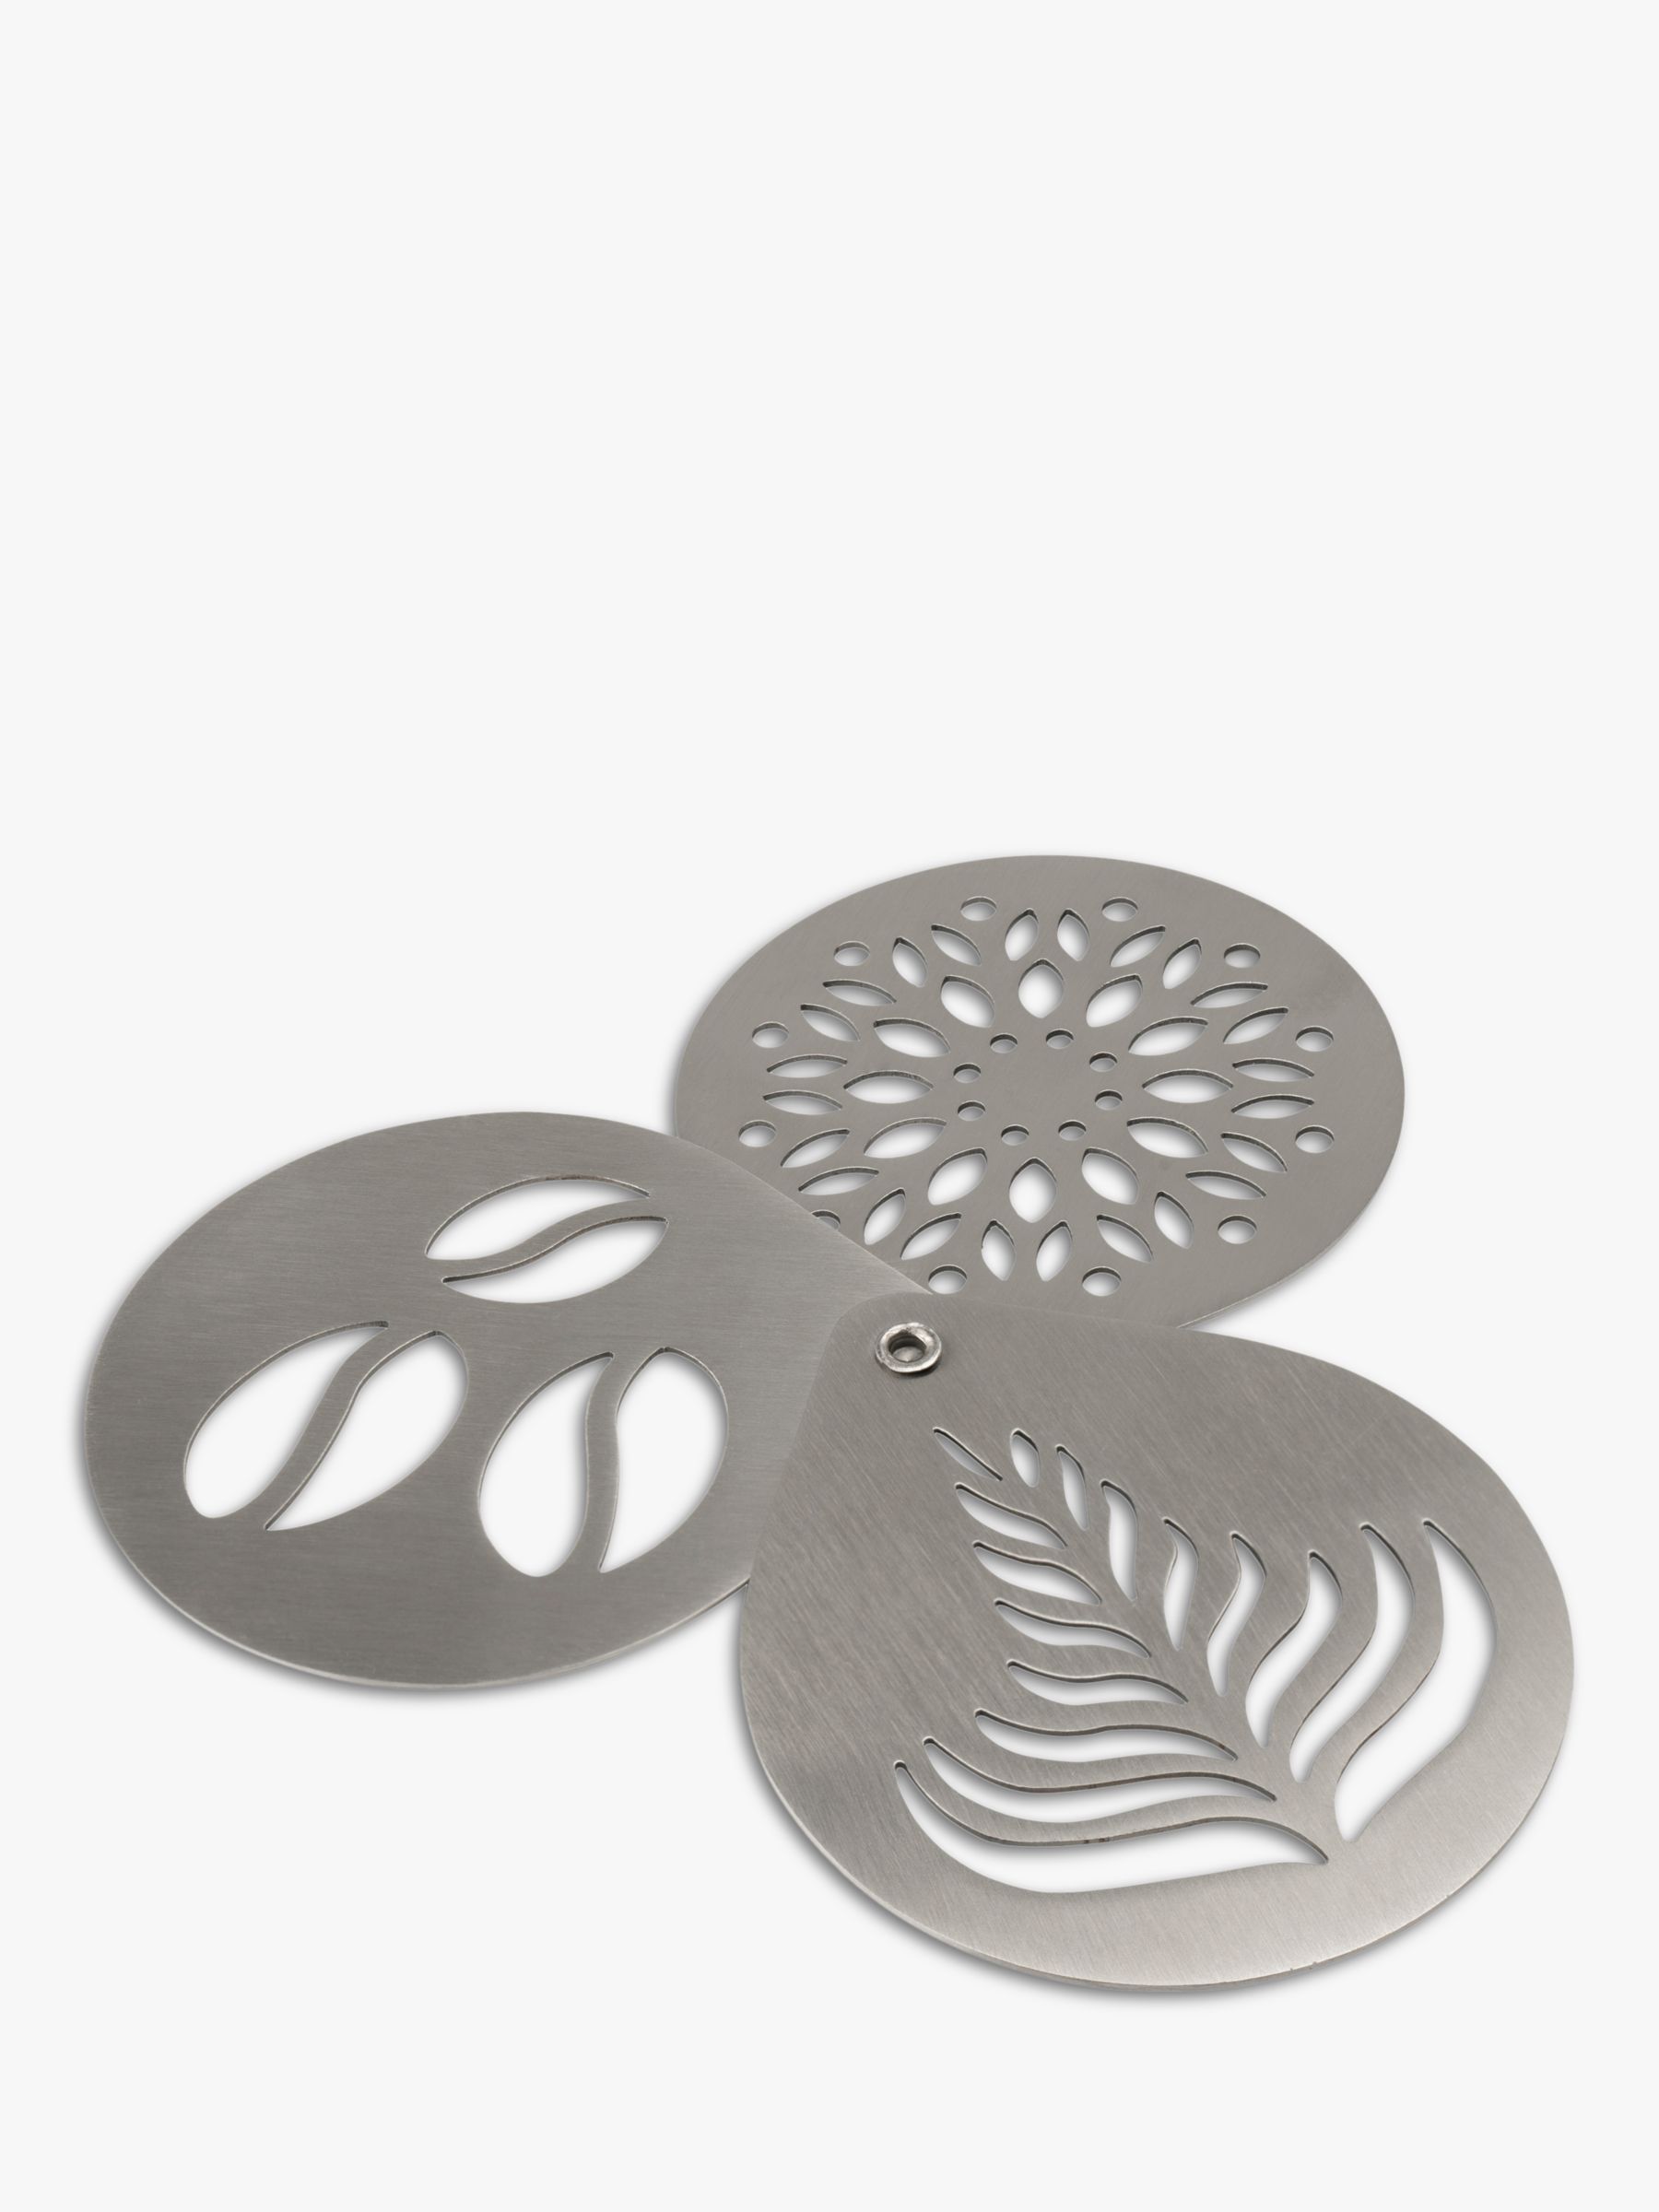 Siip Infuso Stainless Steel Coffee Pattern Stencils, Set of 3